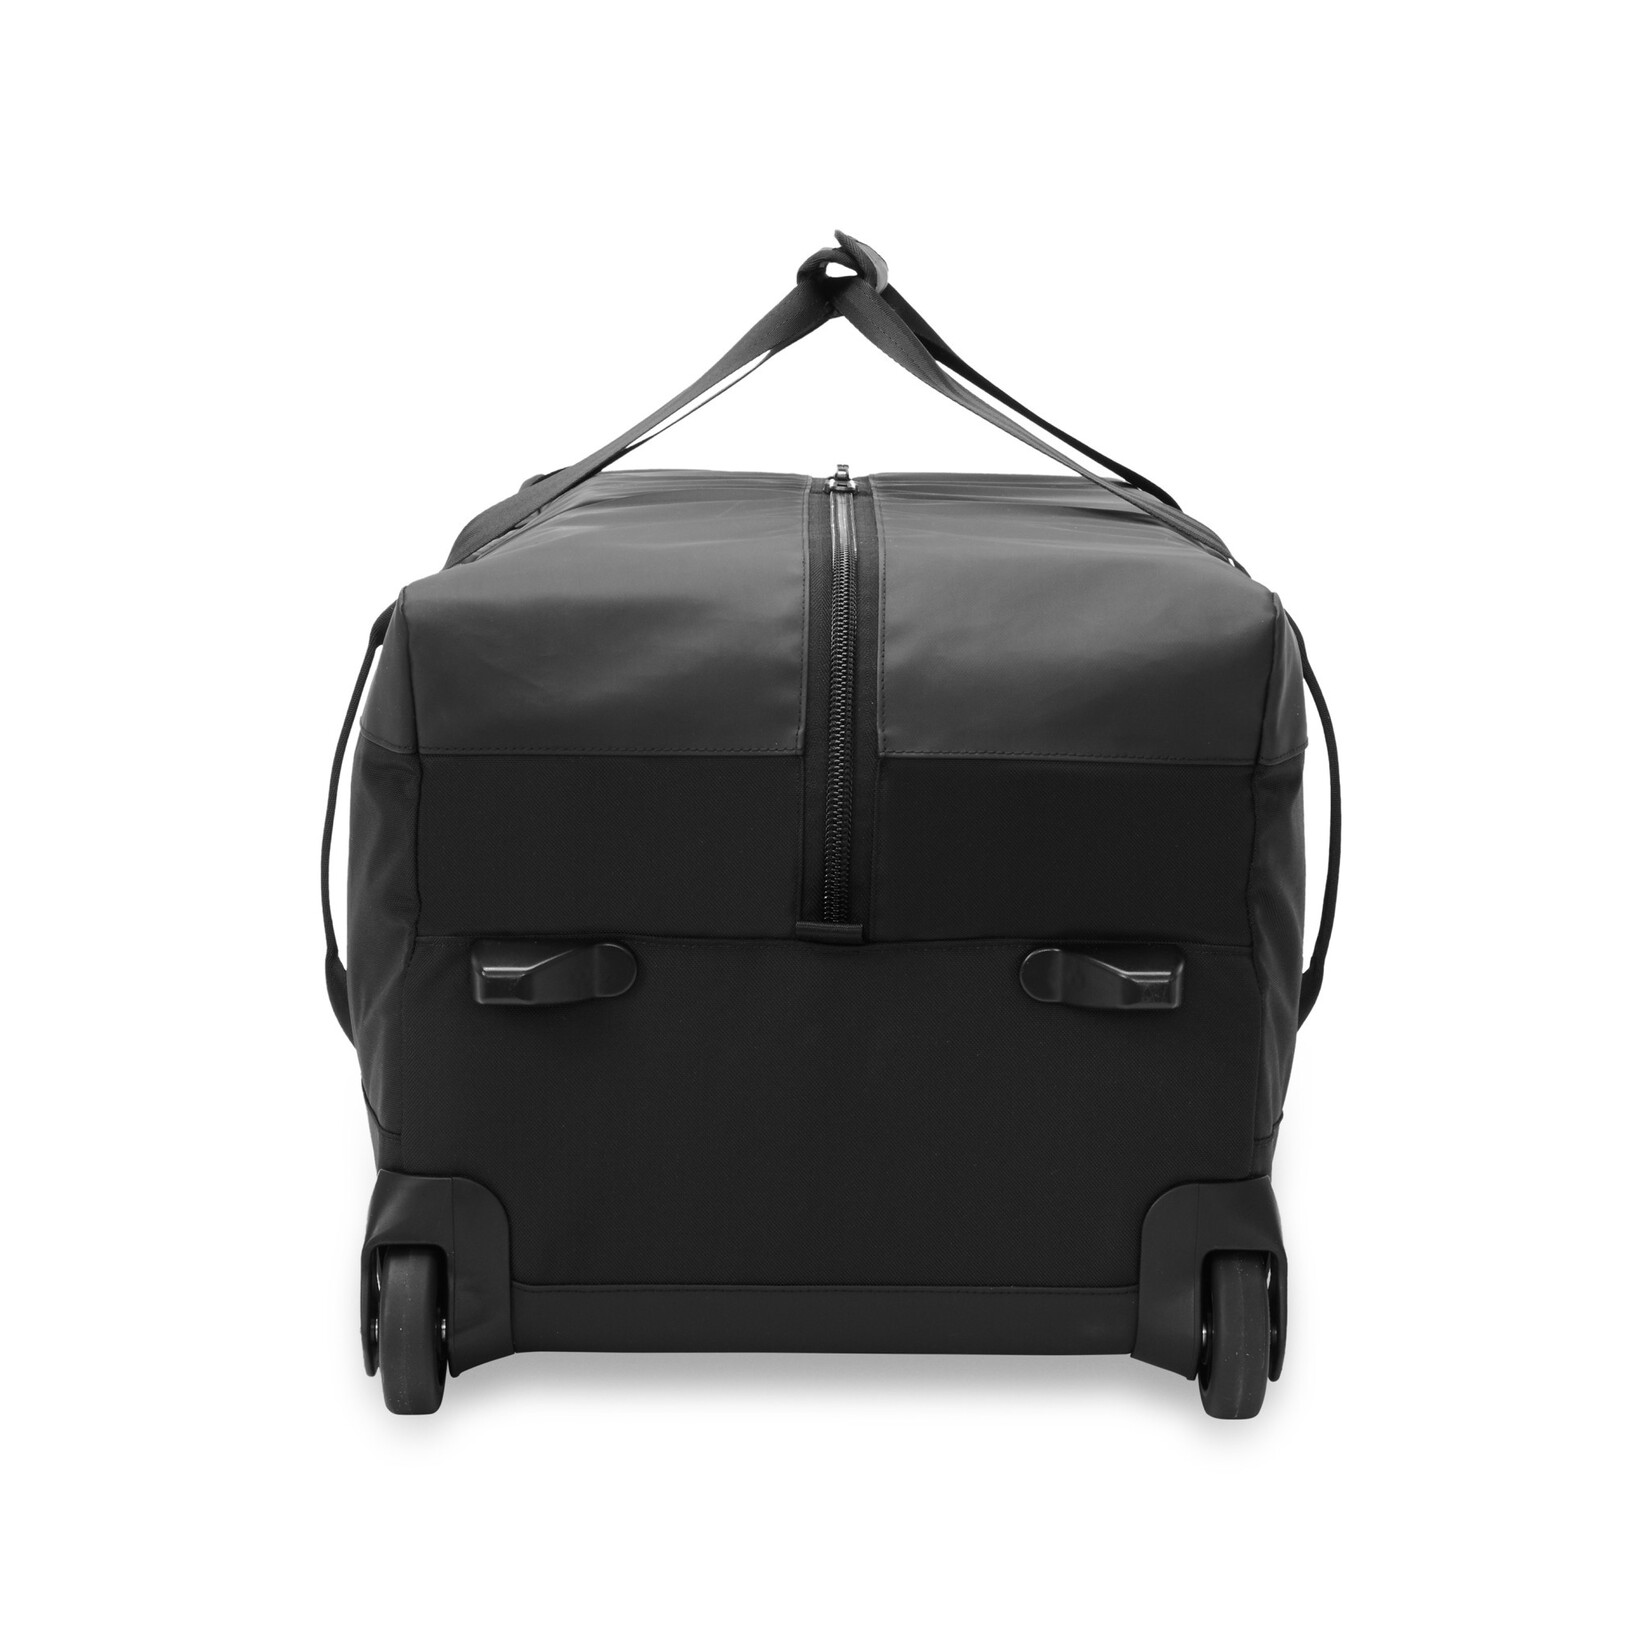 BRIGGS & RILEY EXTRA LARGE ROLLING DUFFLE